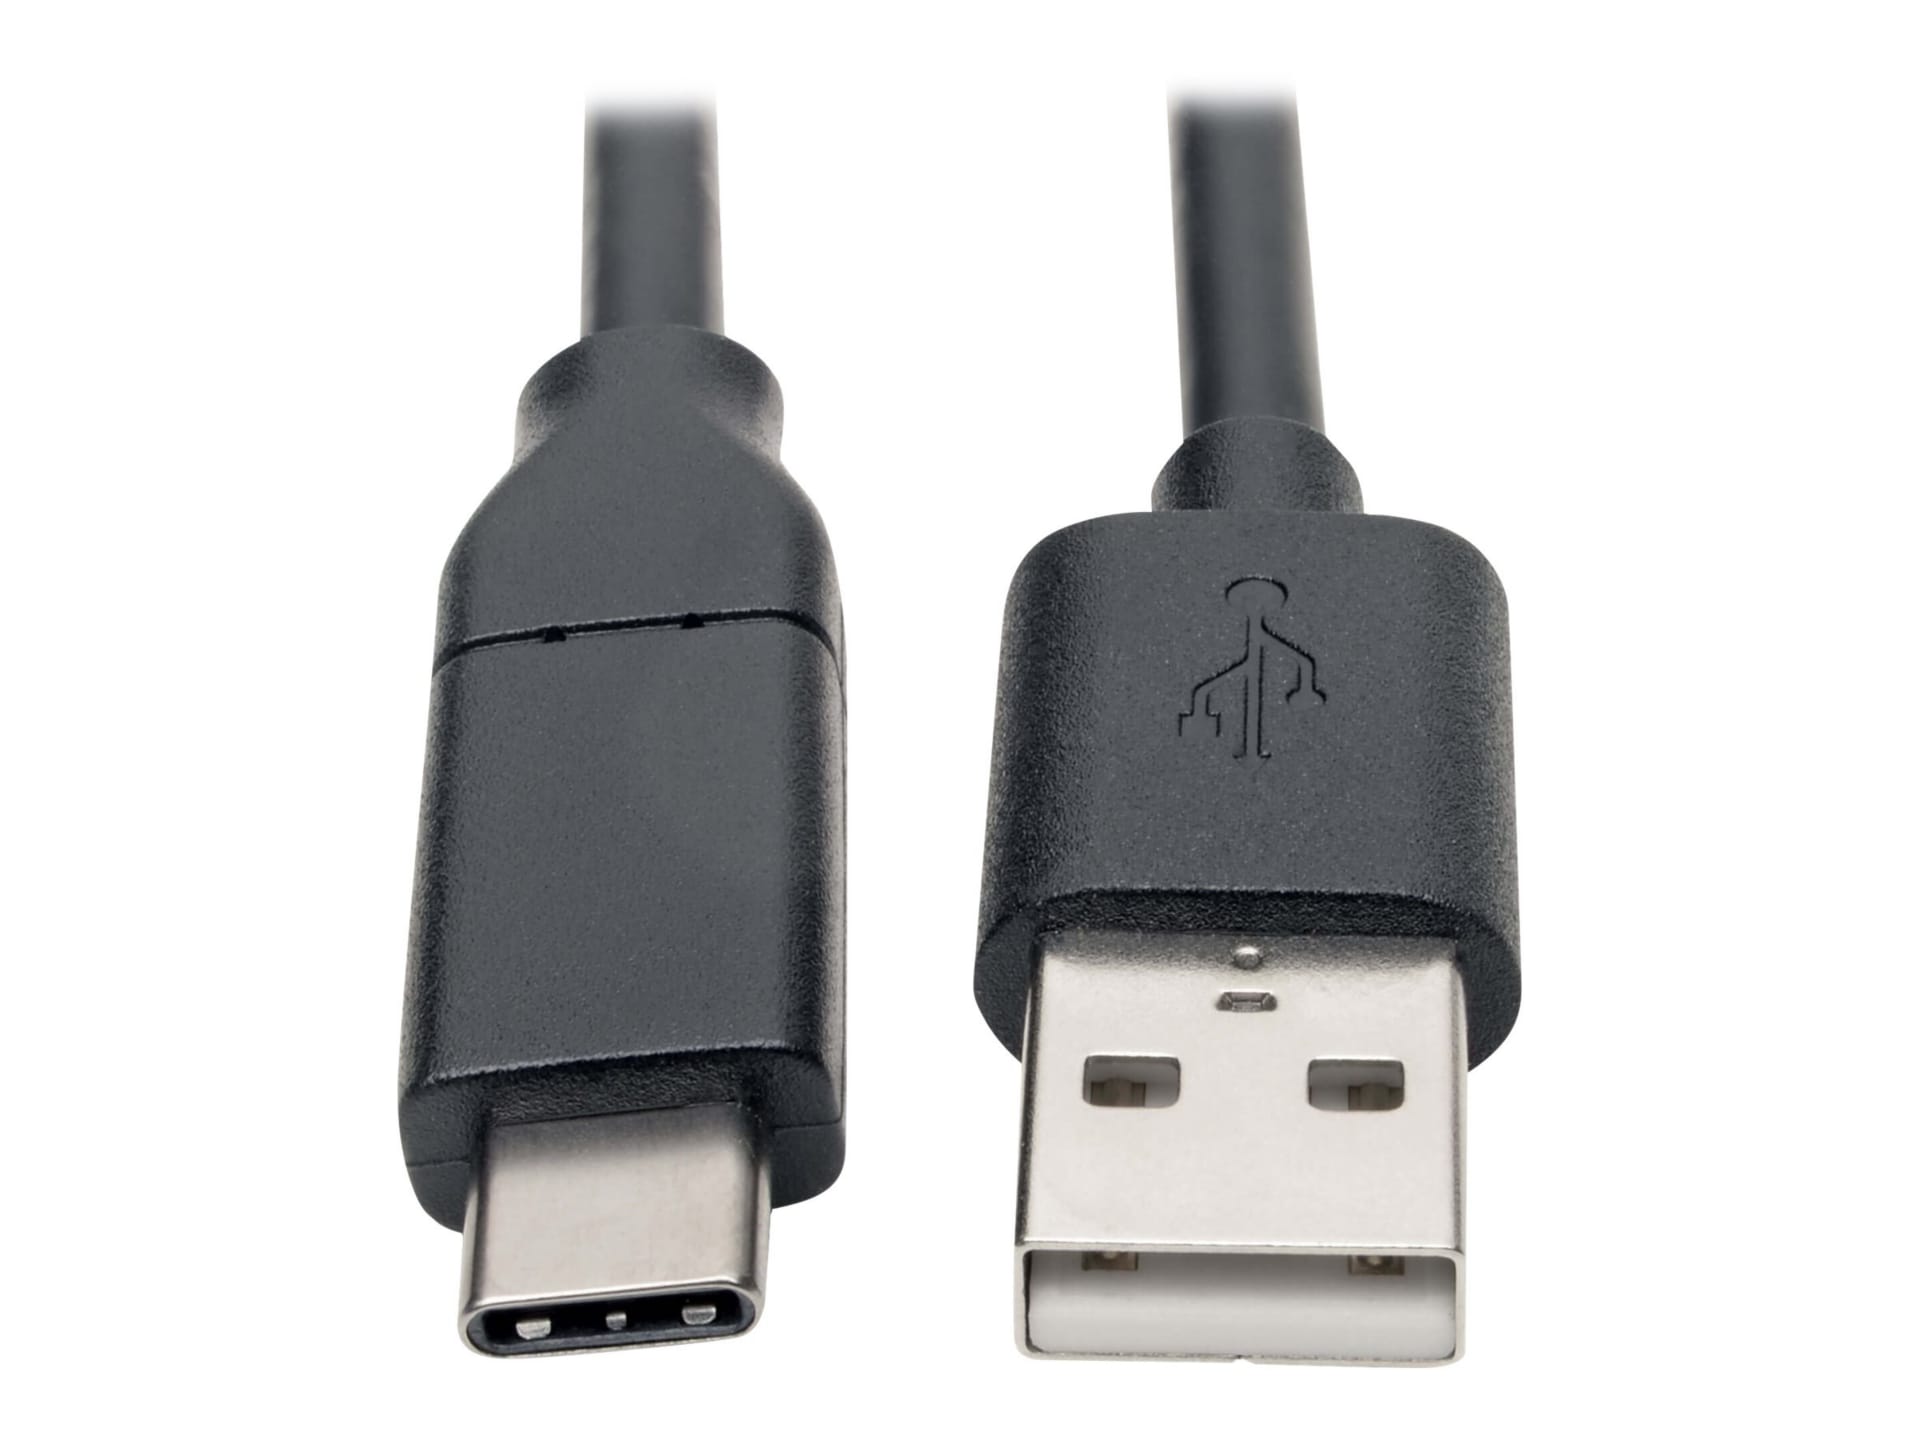 Eaton Tripp Lite Series USB-A to USB-C Cable, USB 2.0, 3A Rating, USB-IF Certified, (M/M), 13 ft. (3.96 m) - USB-C cable